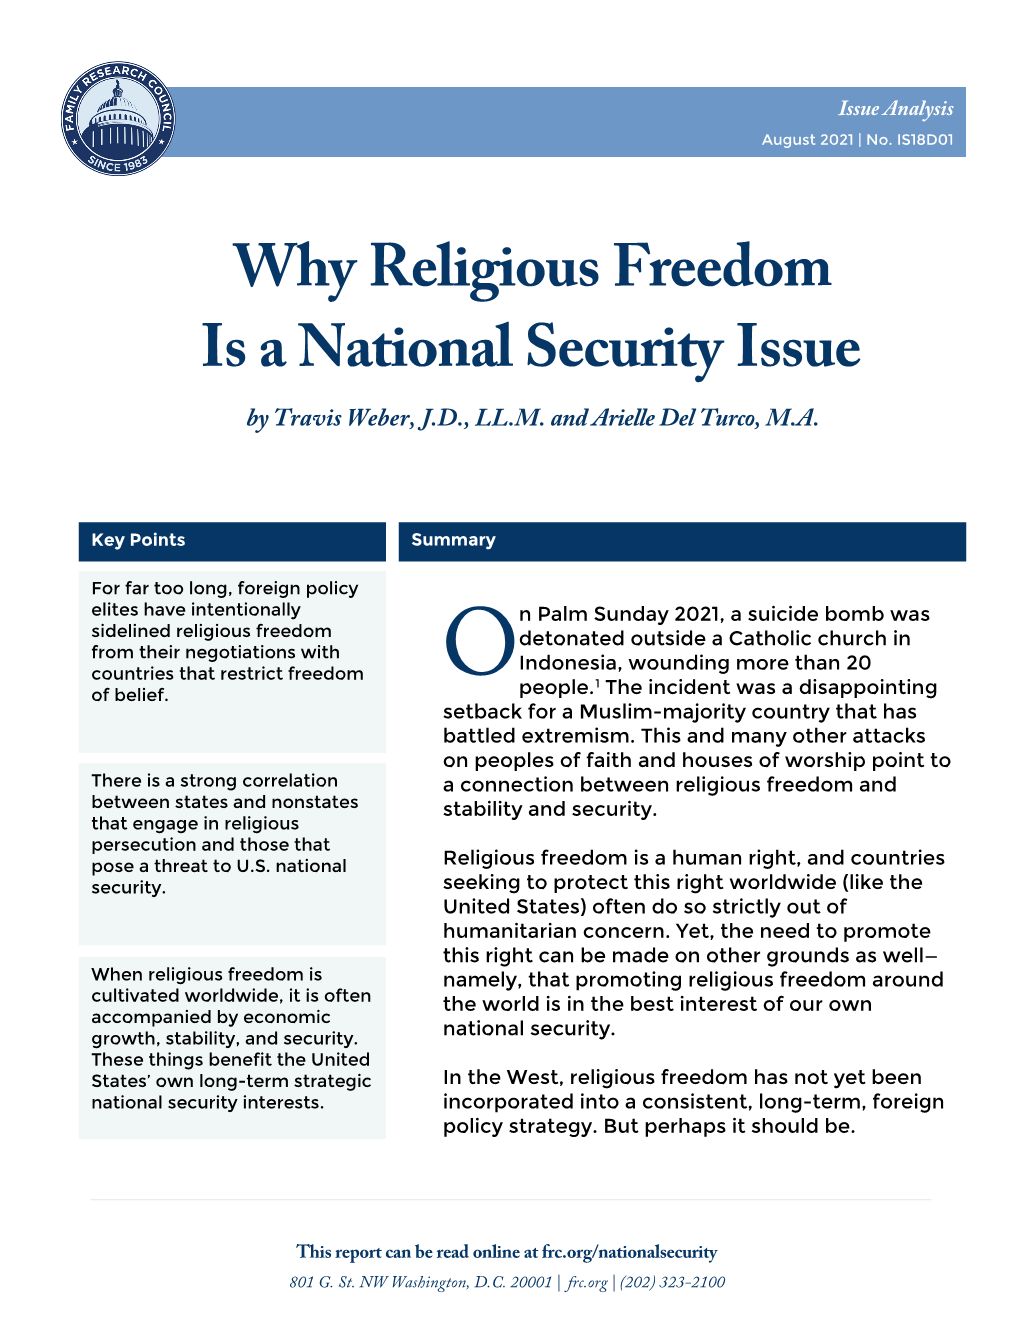 Why Religious Freedom Is a National Security Issue by Travis Weber, J.D., LL.M